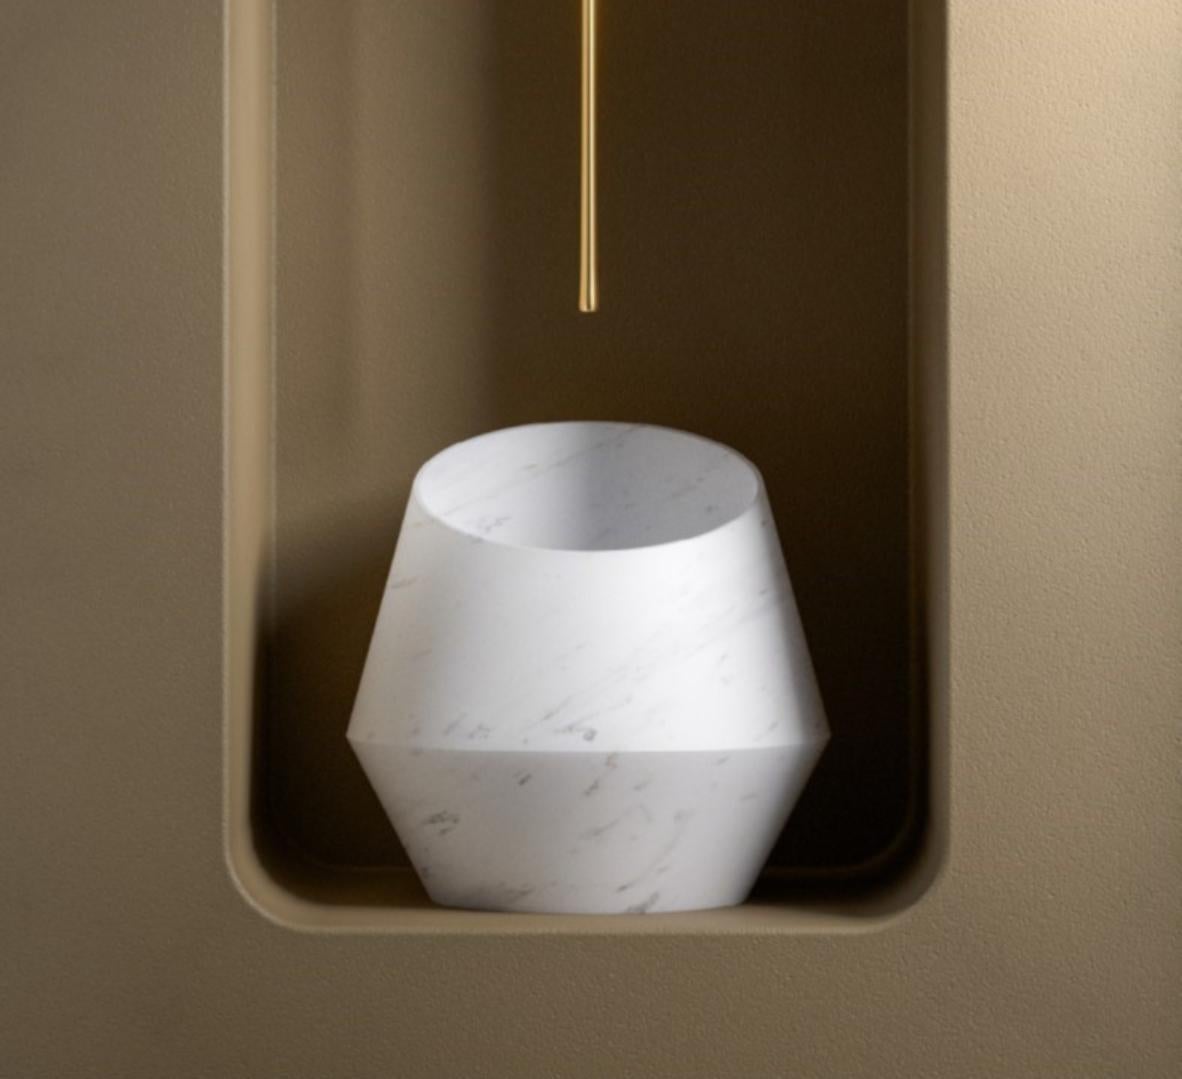 Medium Kyknos Tosca washbasin by Marmi Serafini
Materials: Kyknos marble.
Dimensions: D 49 x H 45 cm
Available in other marbles.
Tap not included.

Tosca is a magnificent washbasin made of a single solid piece of marble.
The large dimensions